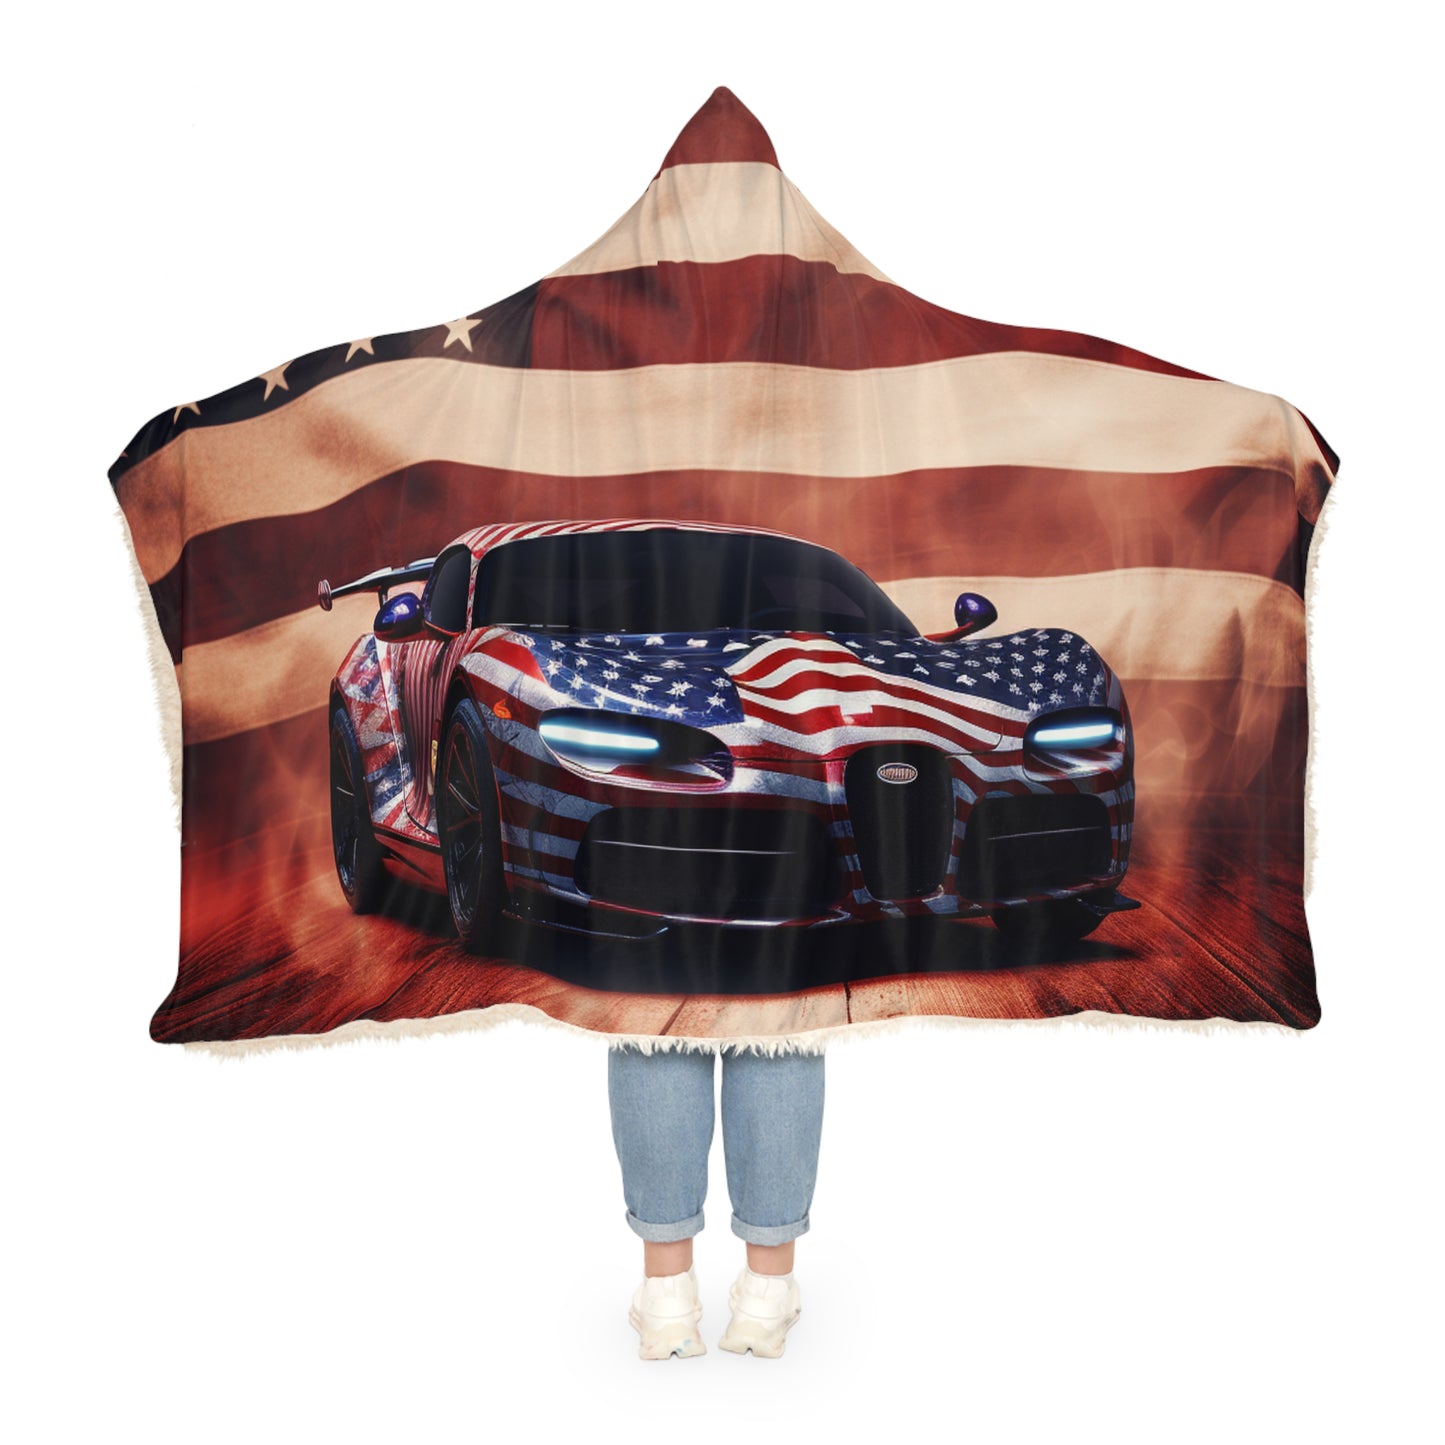 Snuggle Hooded Blanket Abstract American Flag Background Bugatti 2